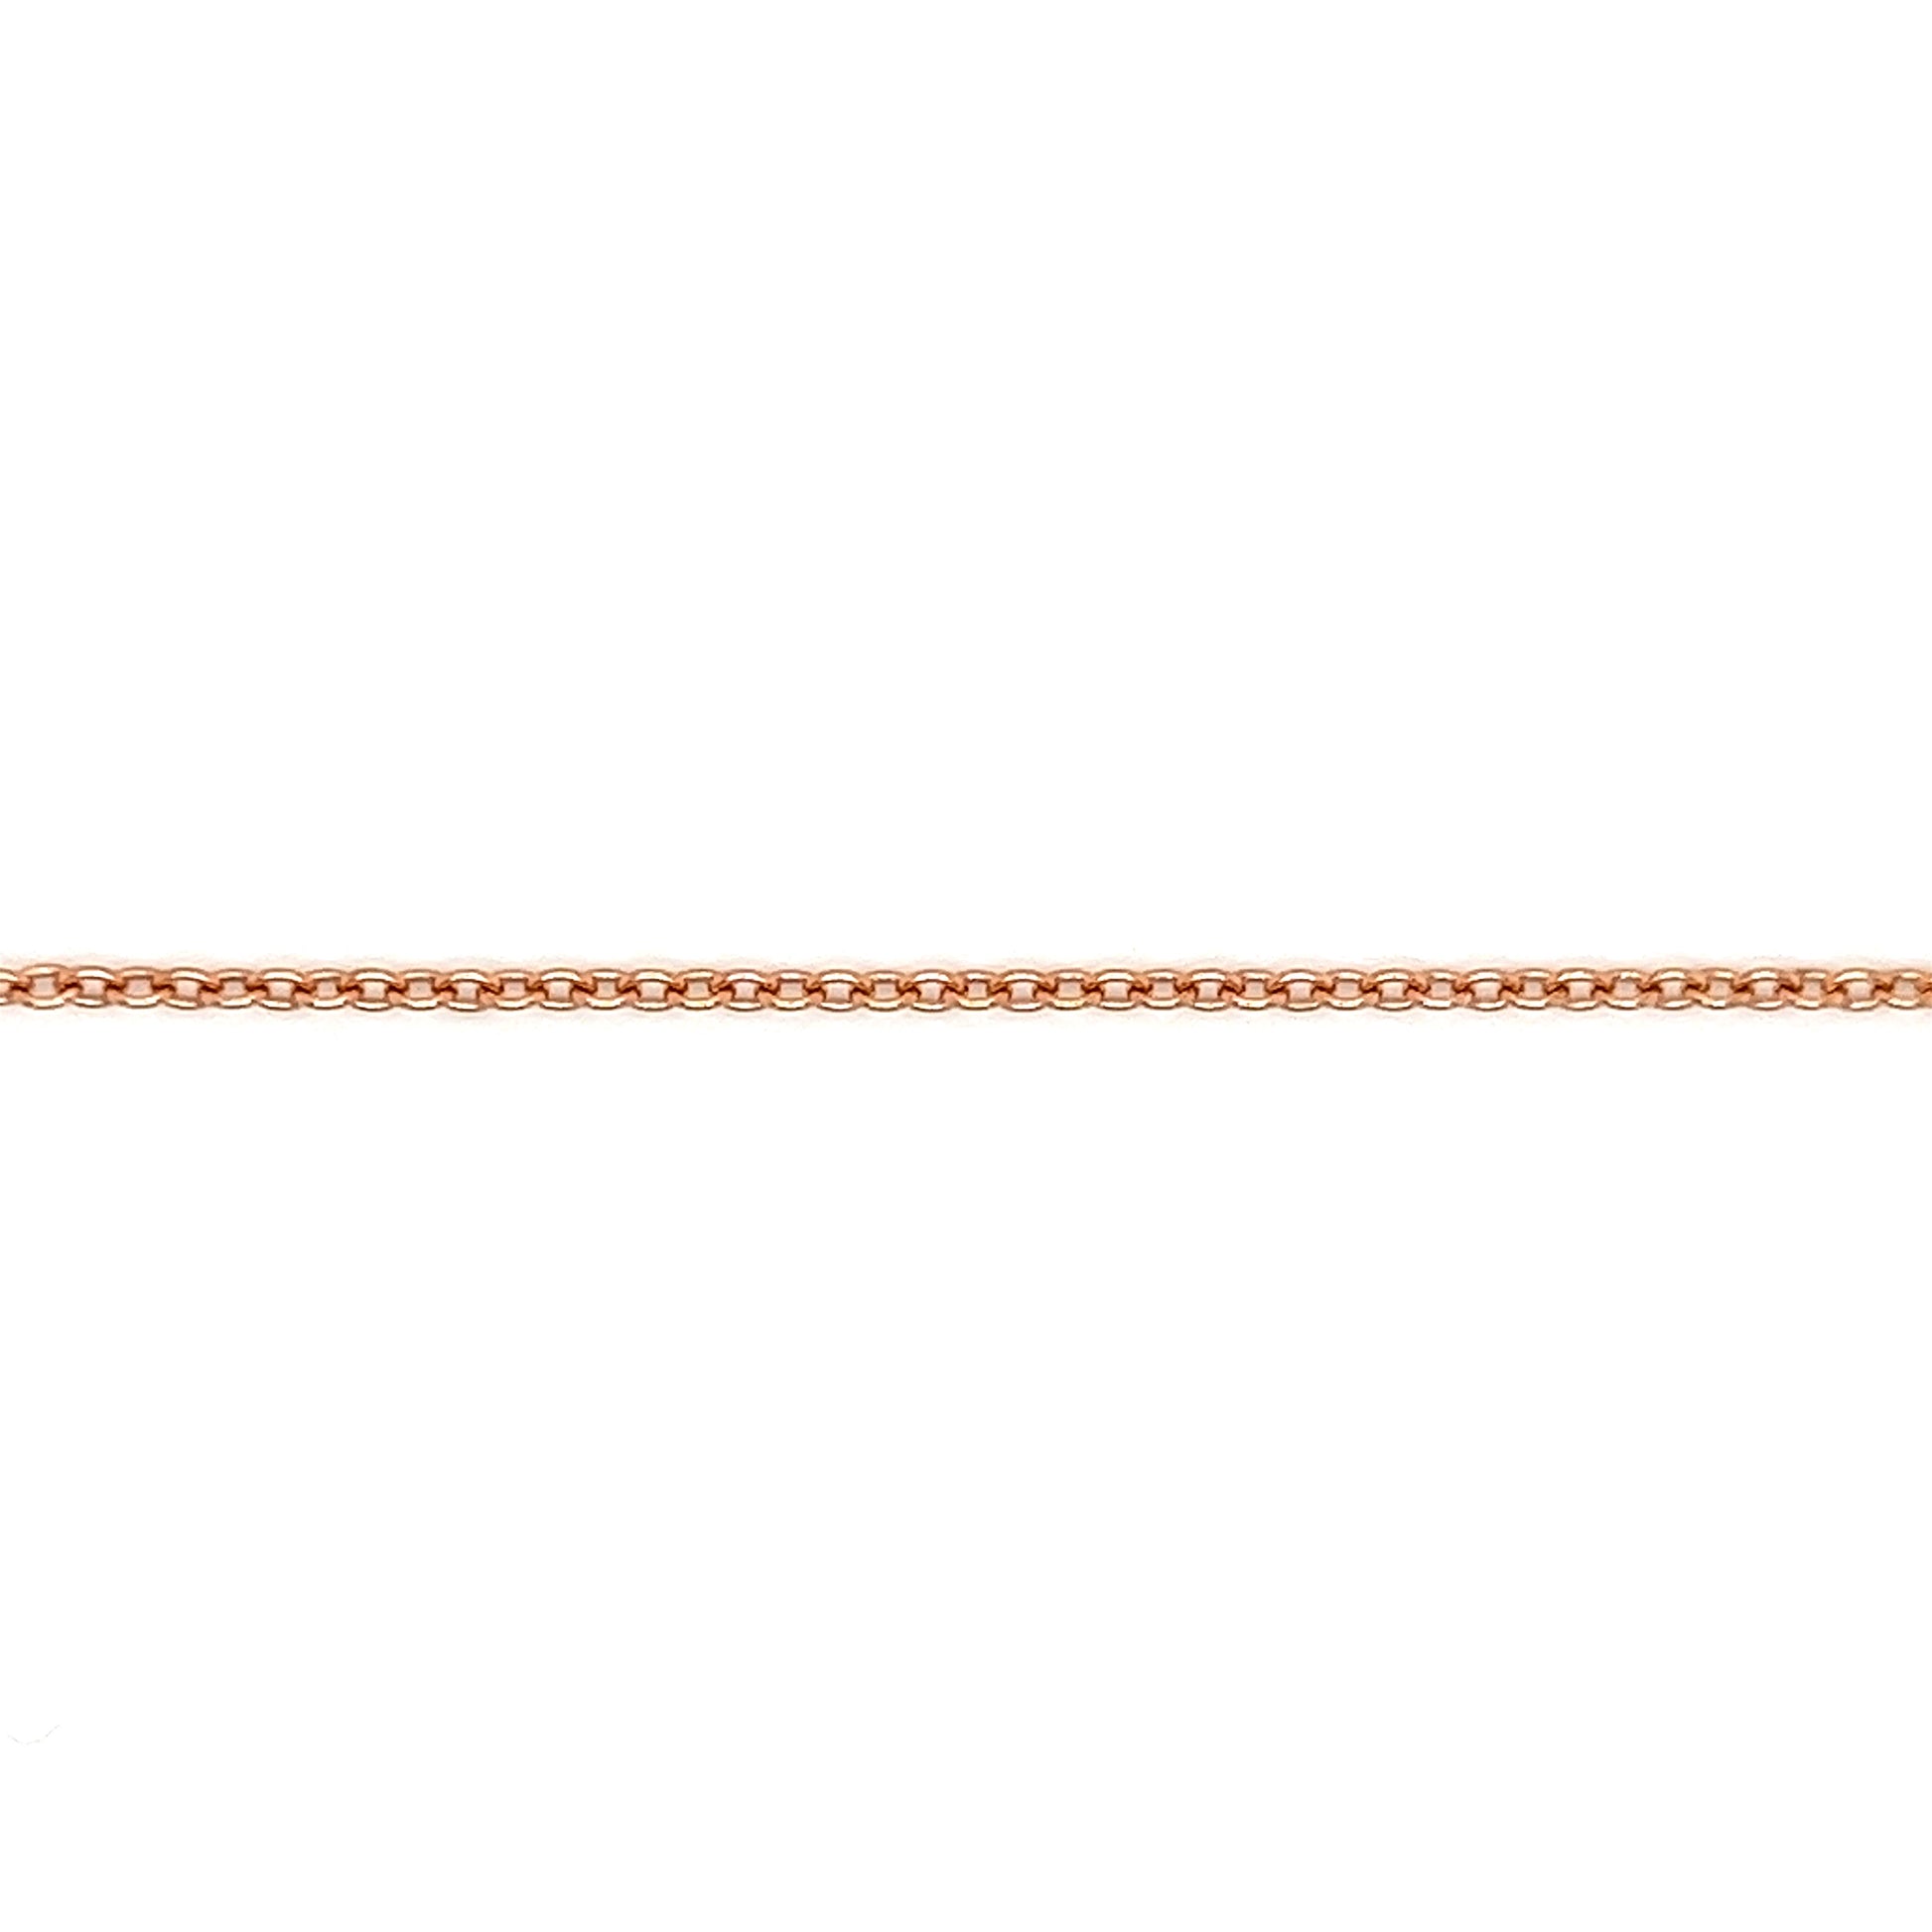 Cable Chain 1.5mm with Adjustable Length in 14K Rose Gold Chain View